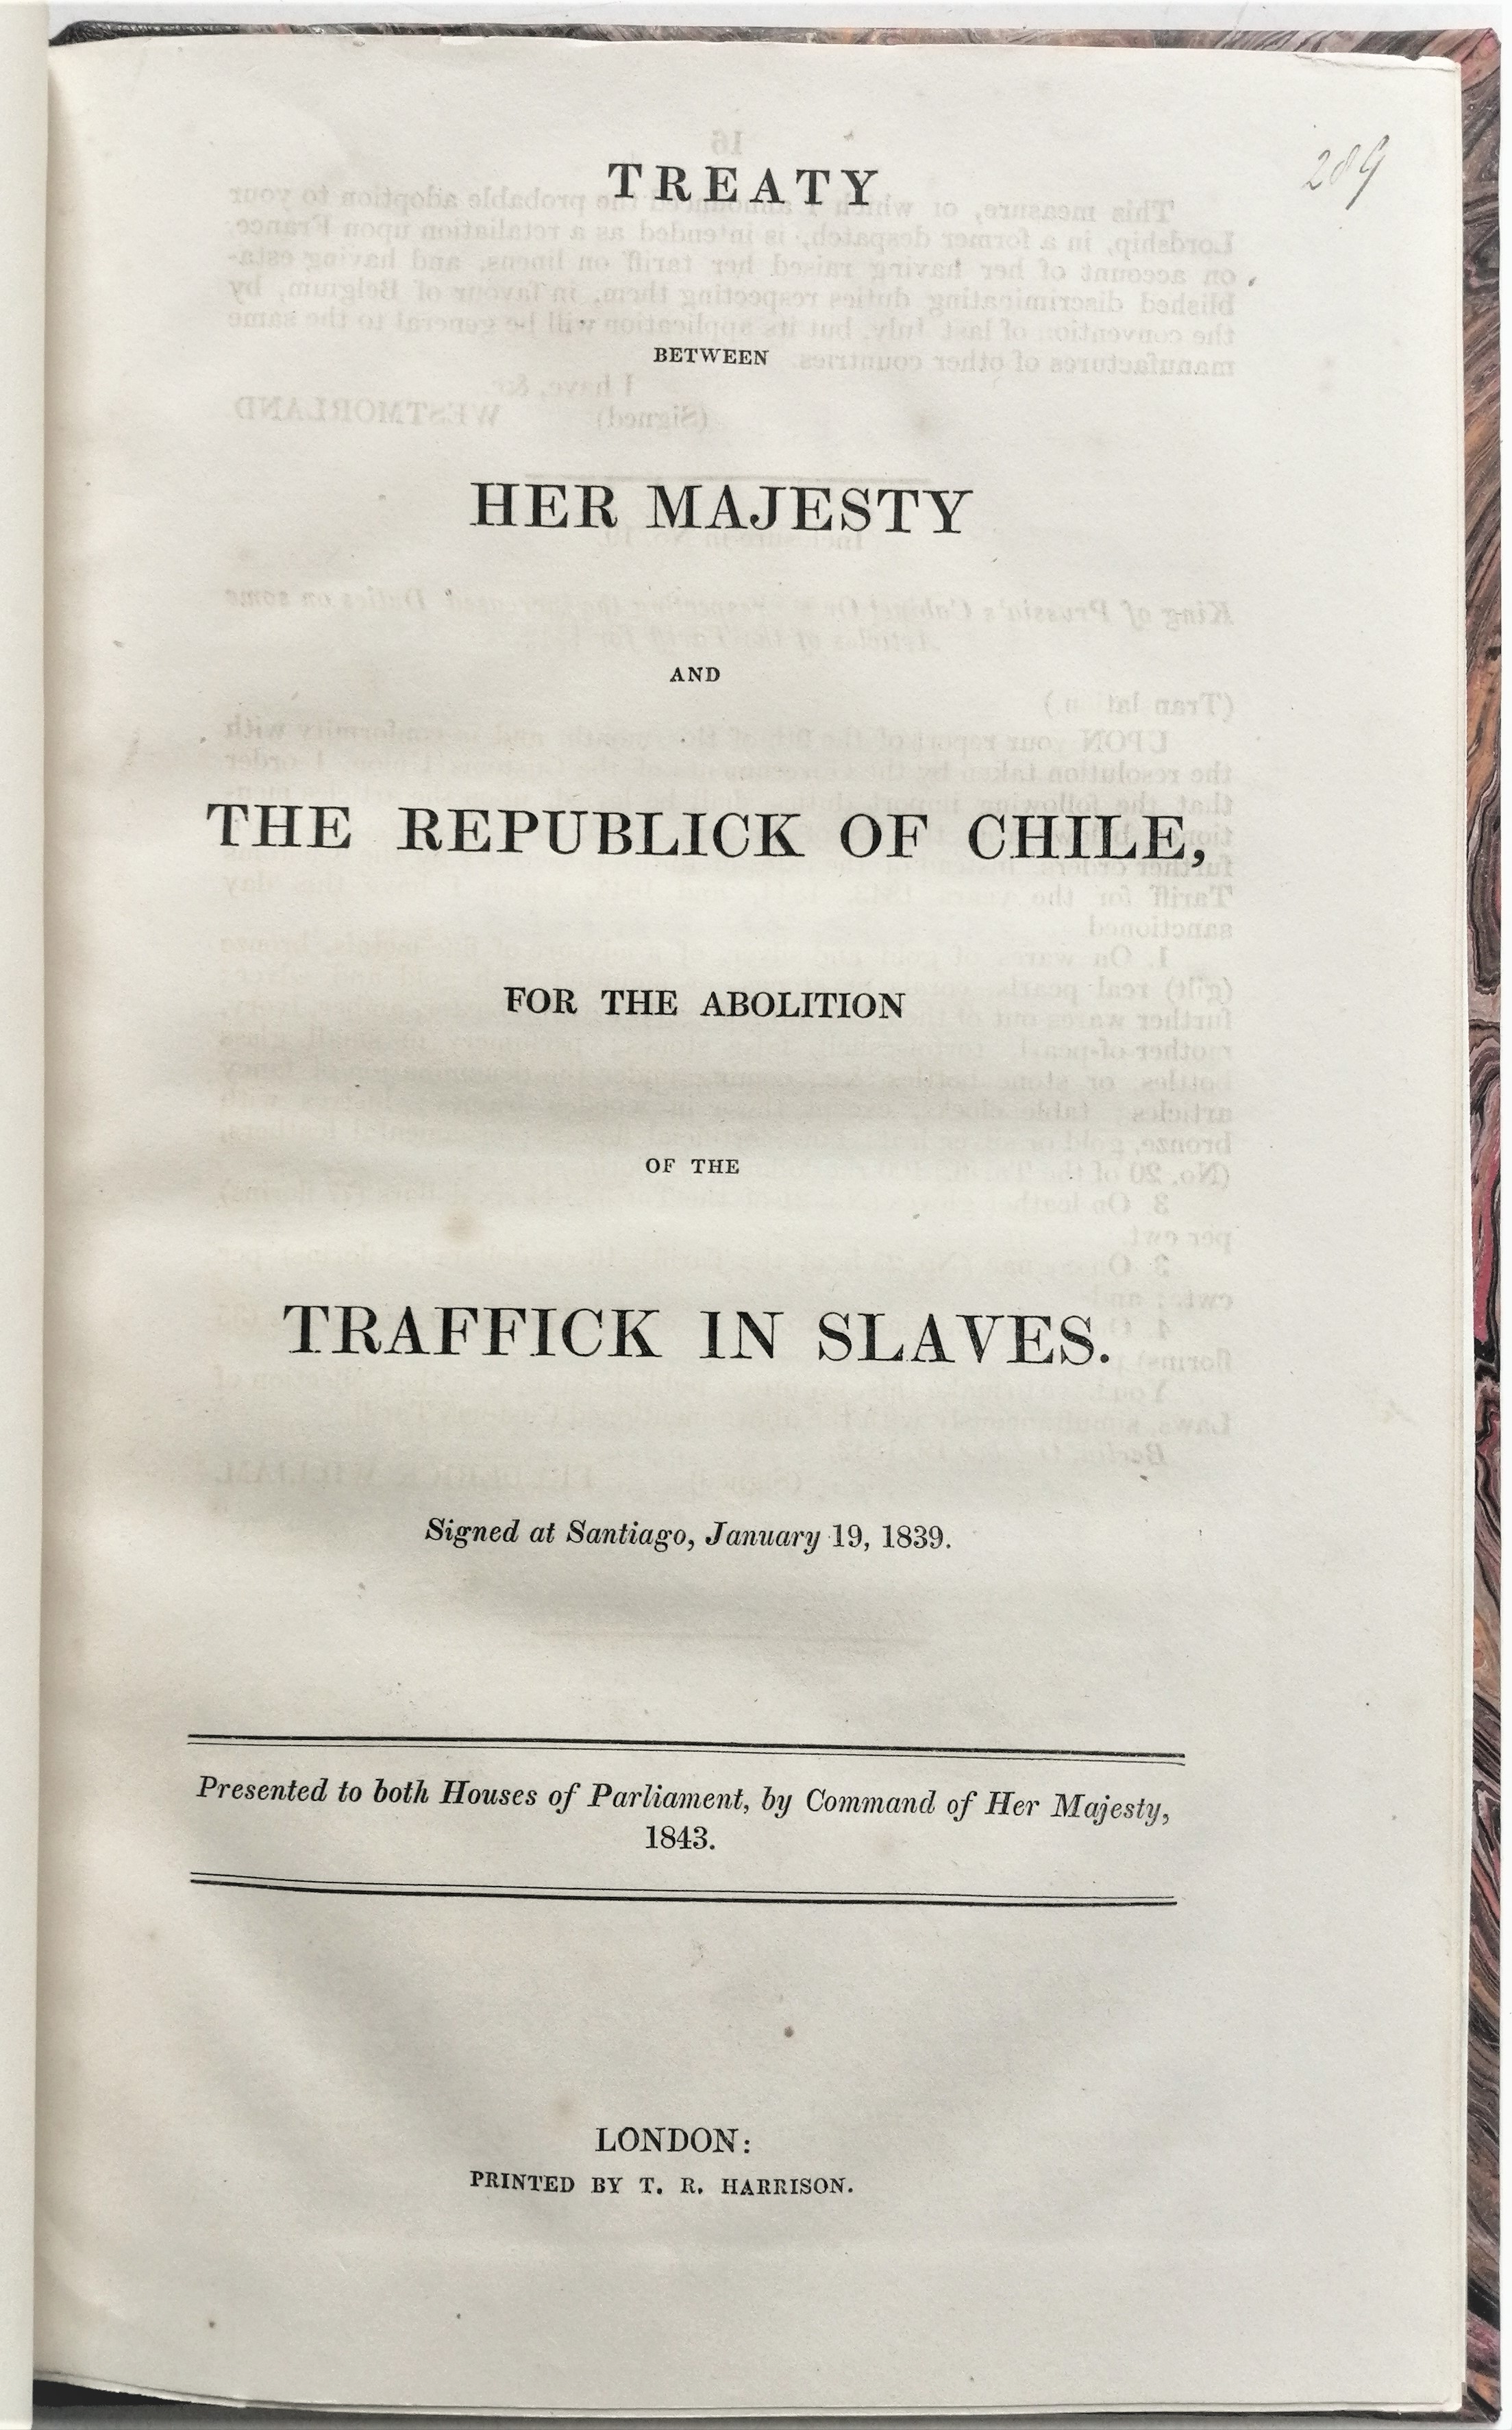 Treaty between her majesty and the republick of Chile